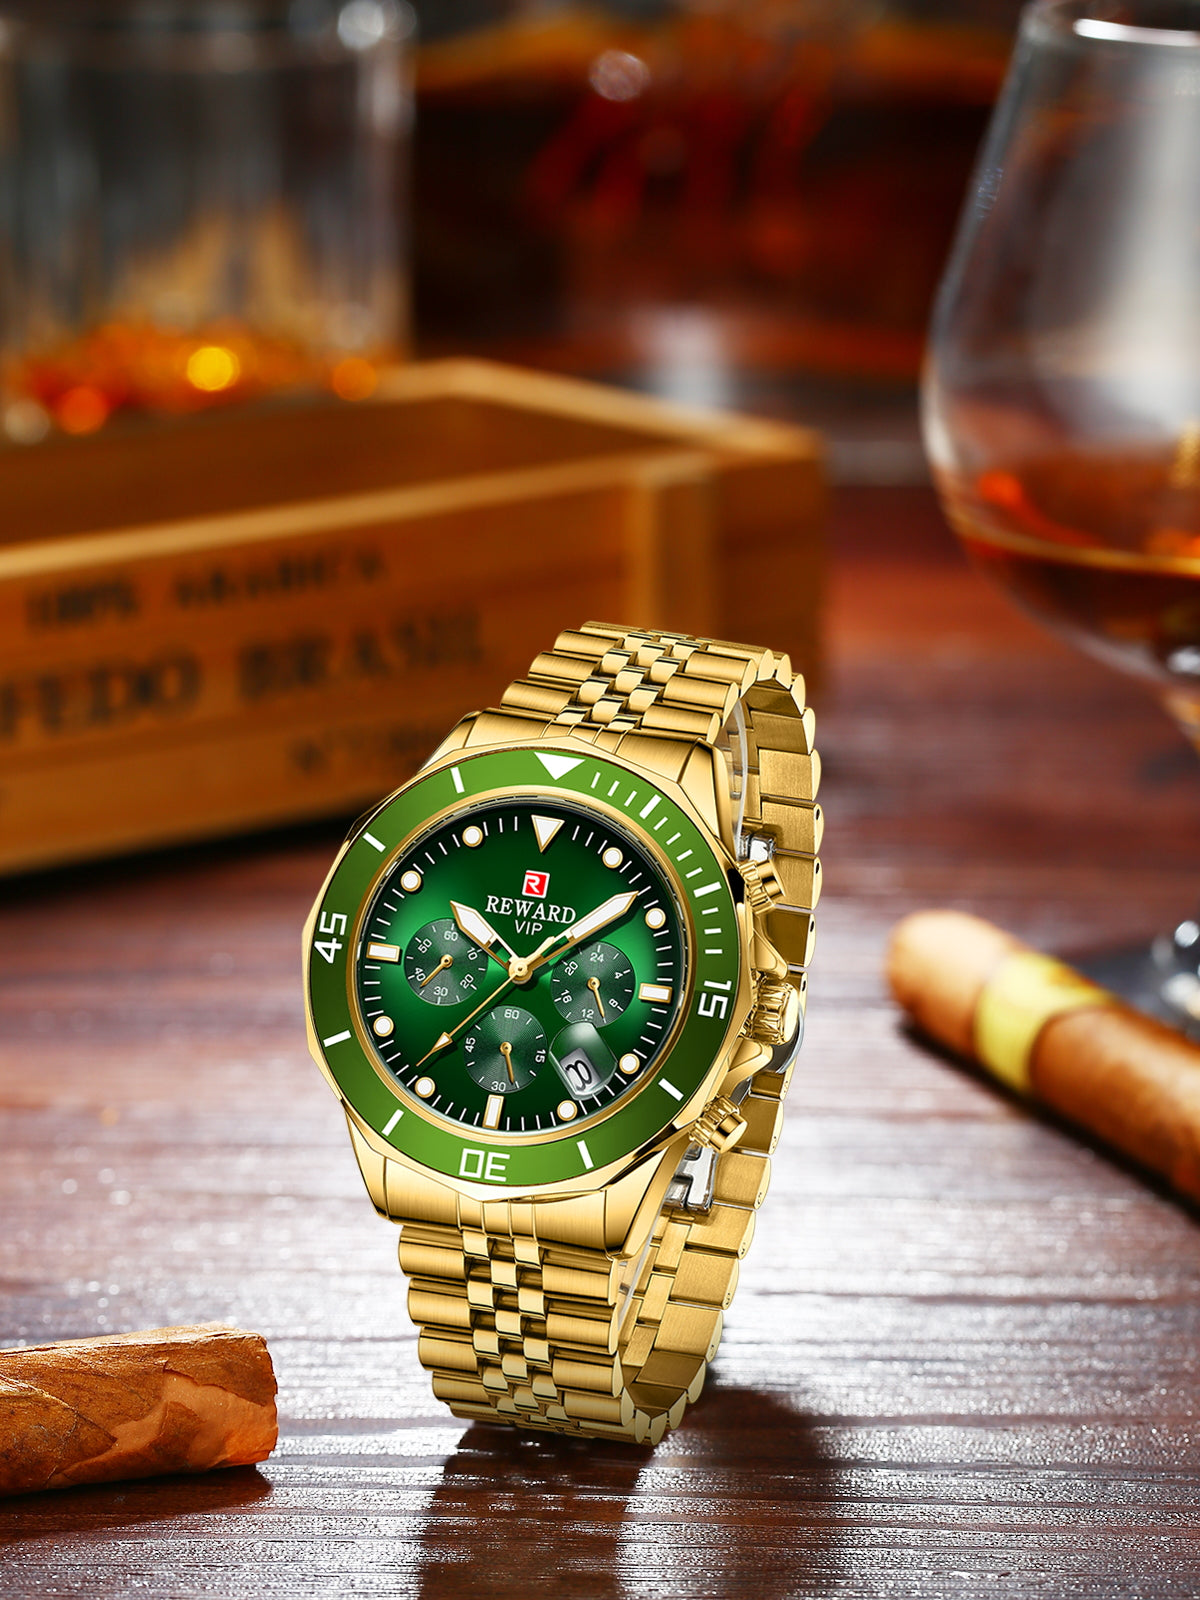 Marina Multifunction Watch Steel, Gold and Green colour